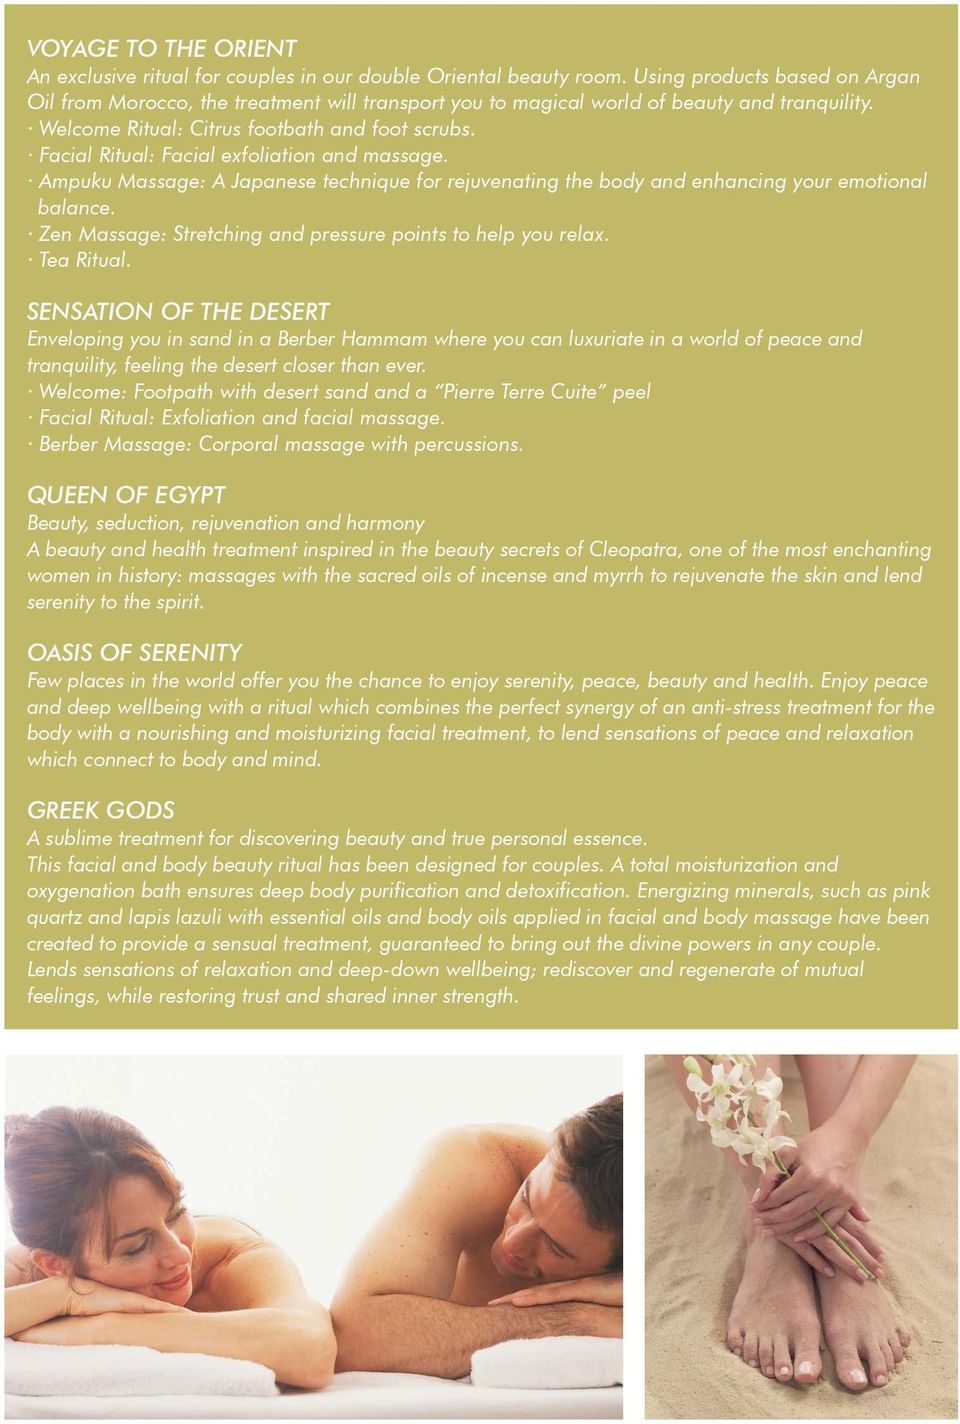 Facial Ritual: Facial exfoliation and massage. Ampuku Massage: A Japanese technique for rejuvenating the body and enhancing your emotional balance.